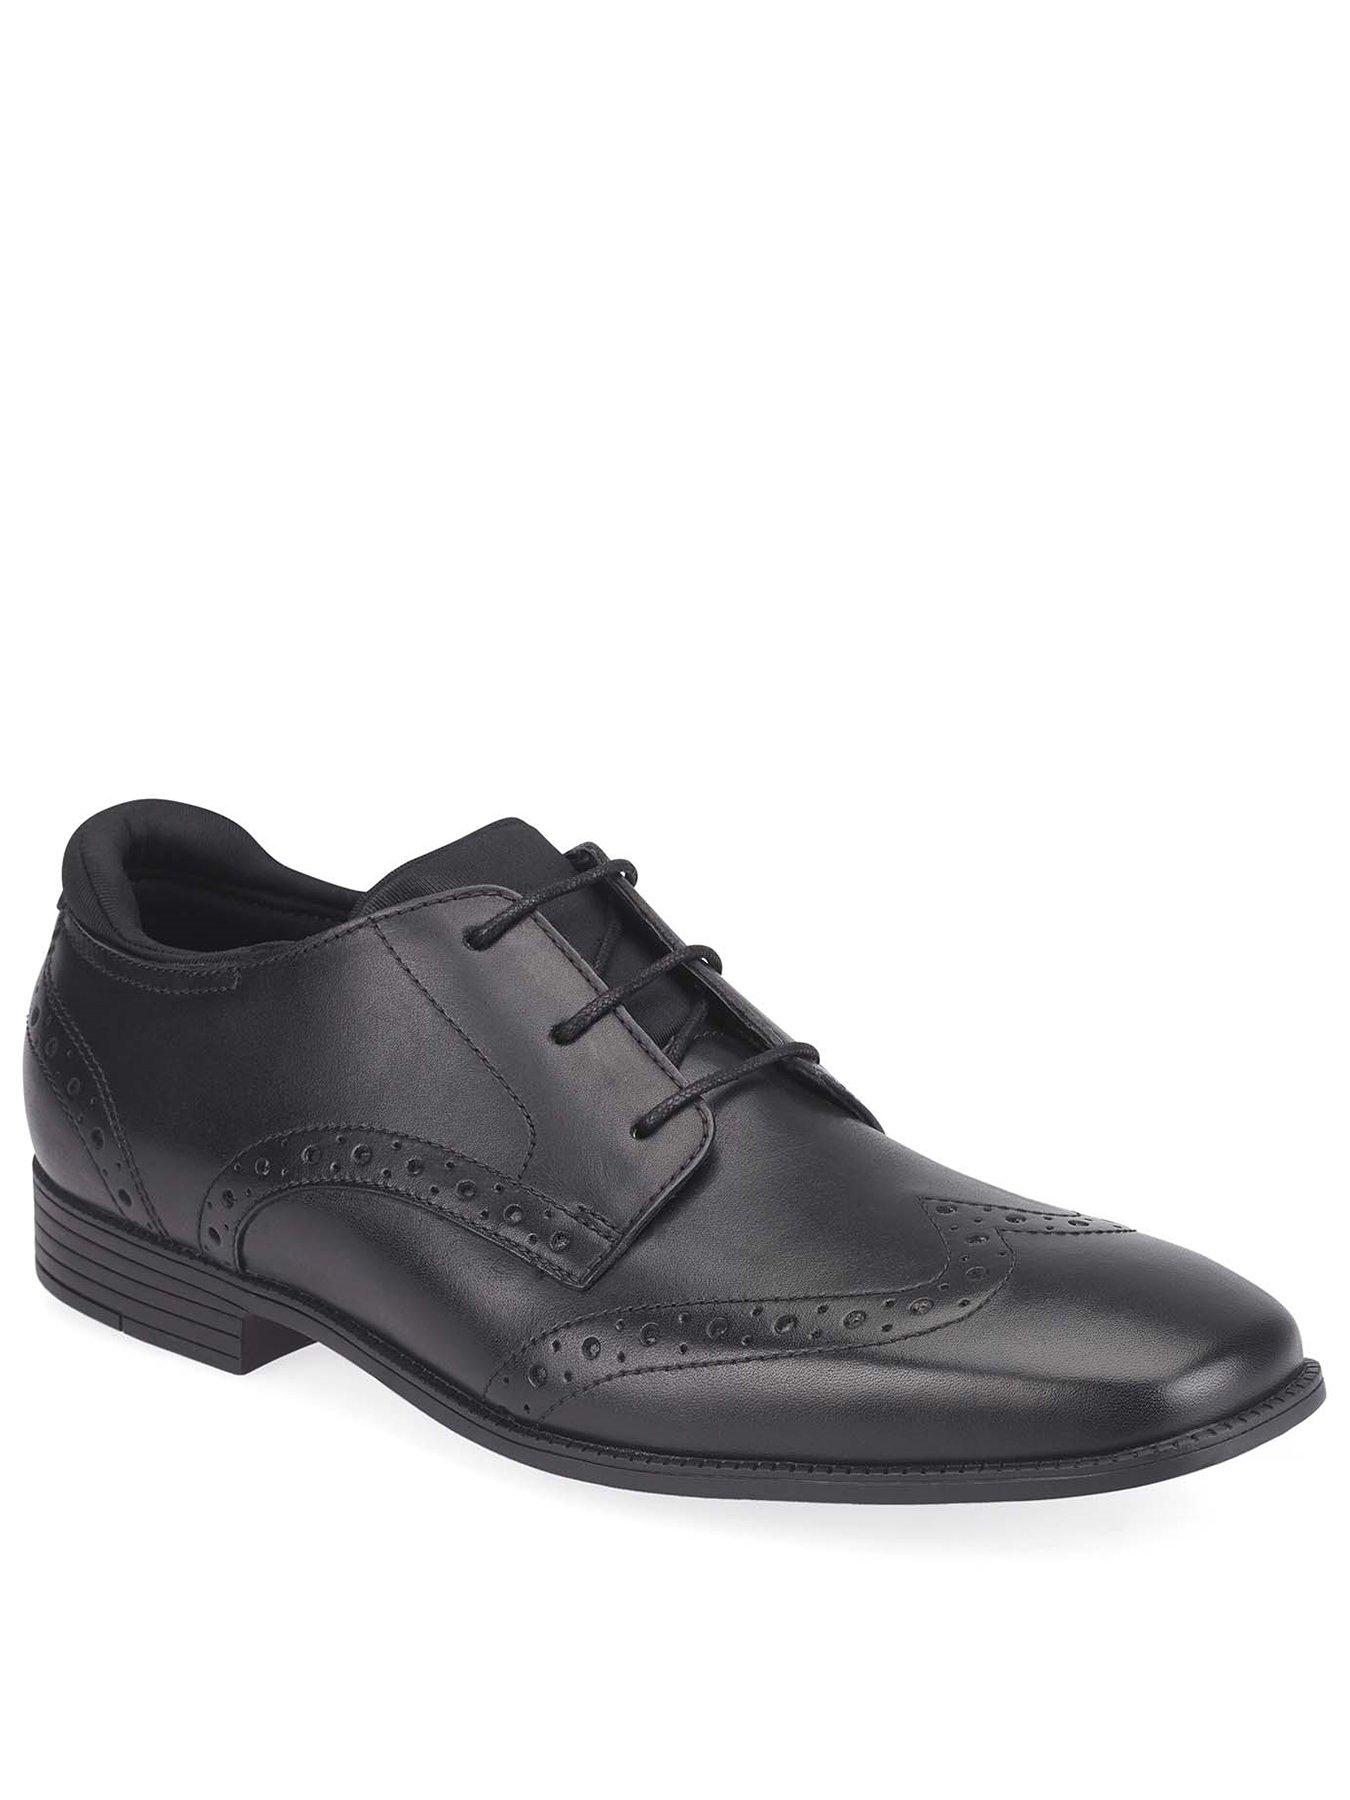  Boys Tailor Lace Up School Shoes - Black Leather